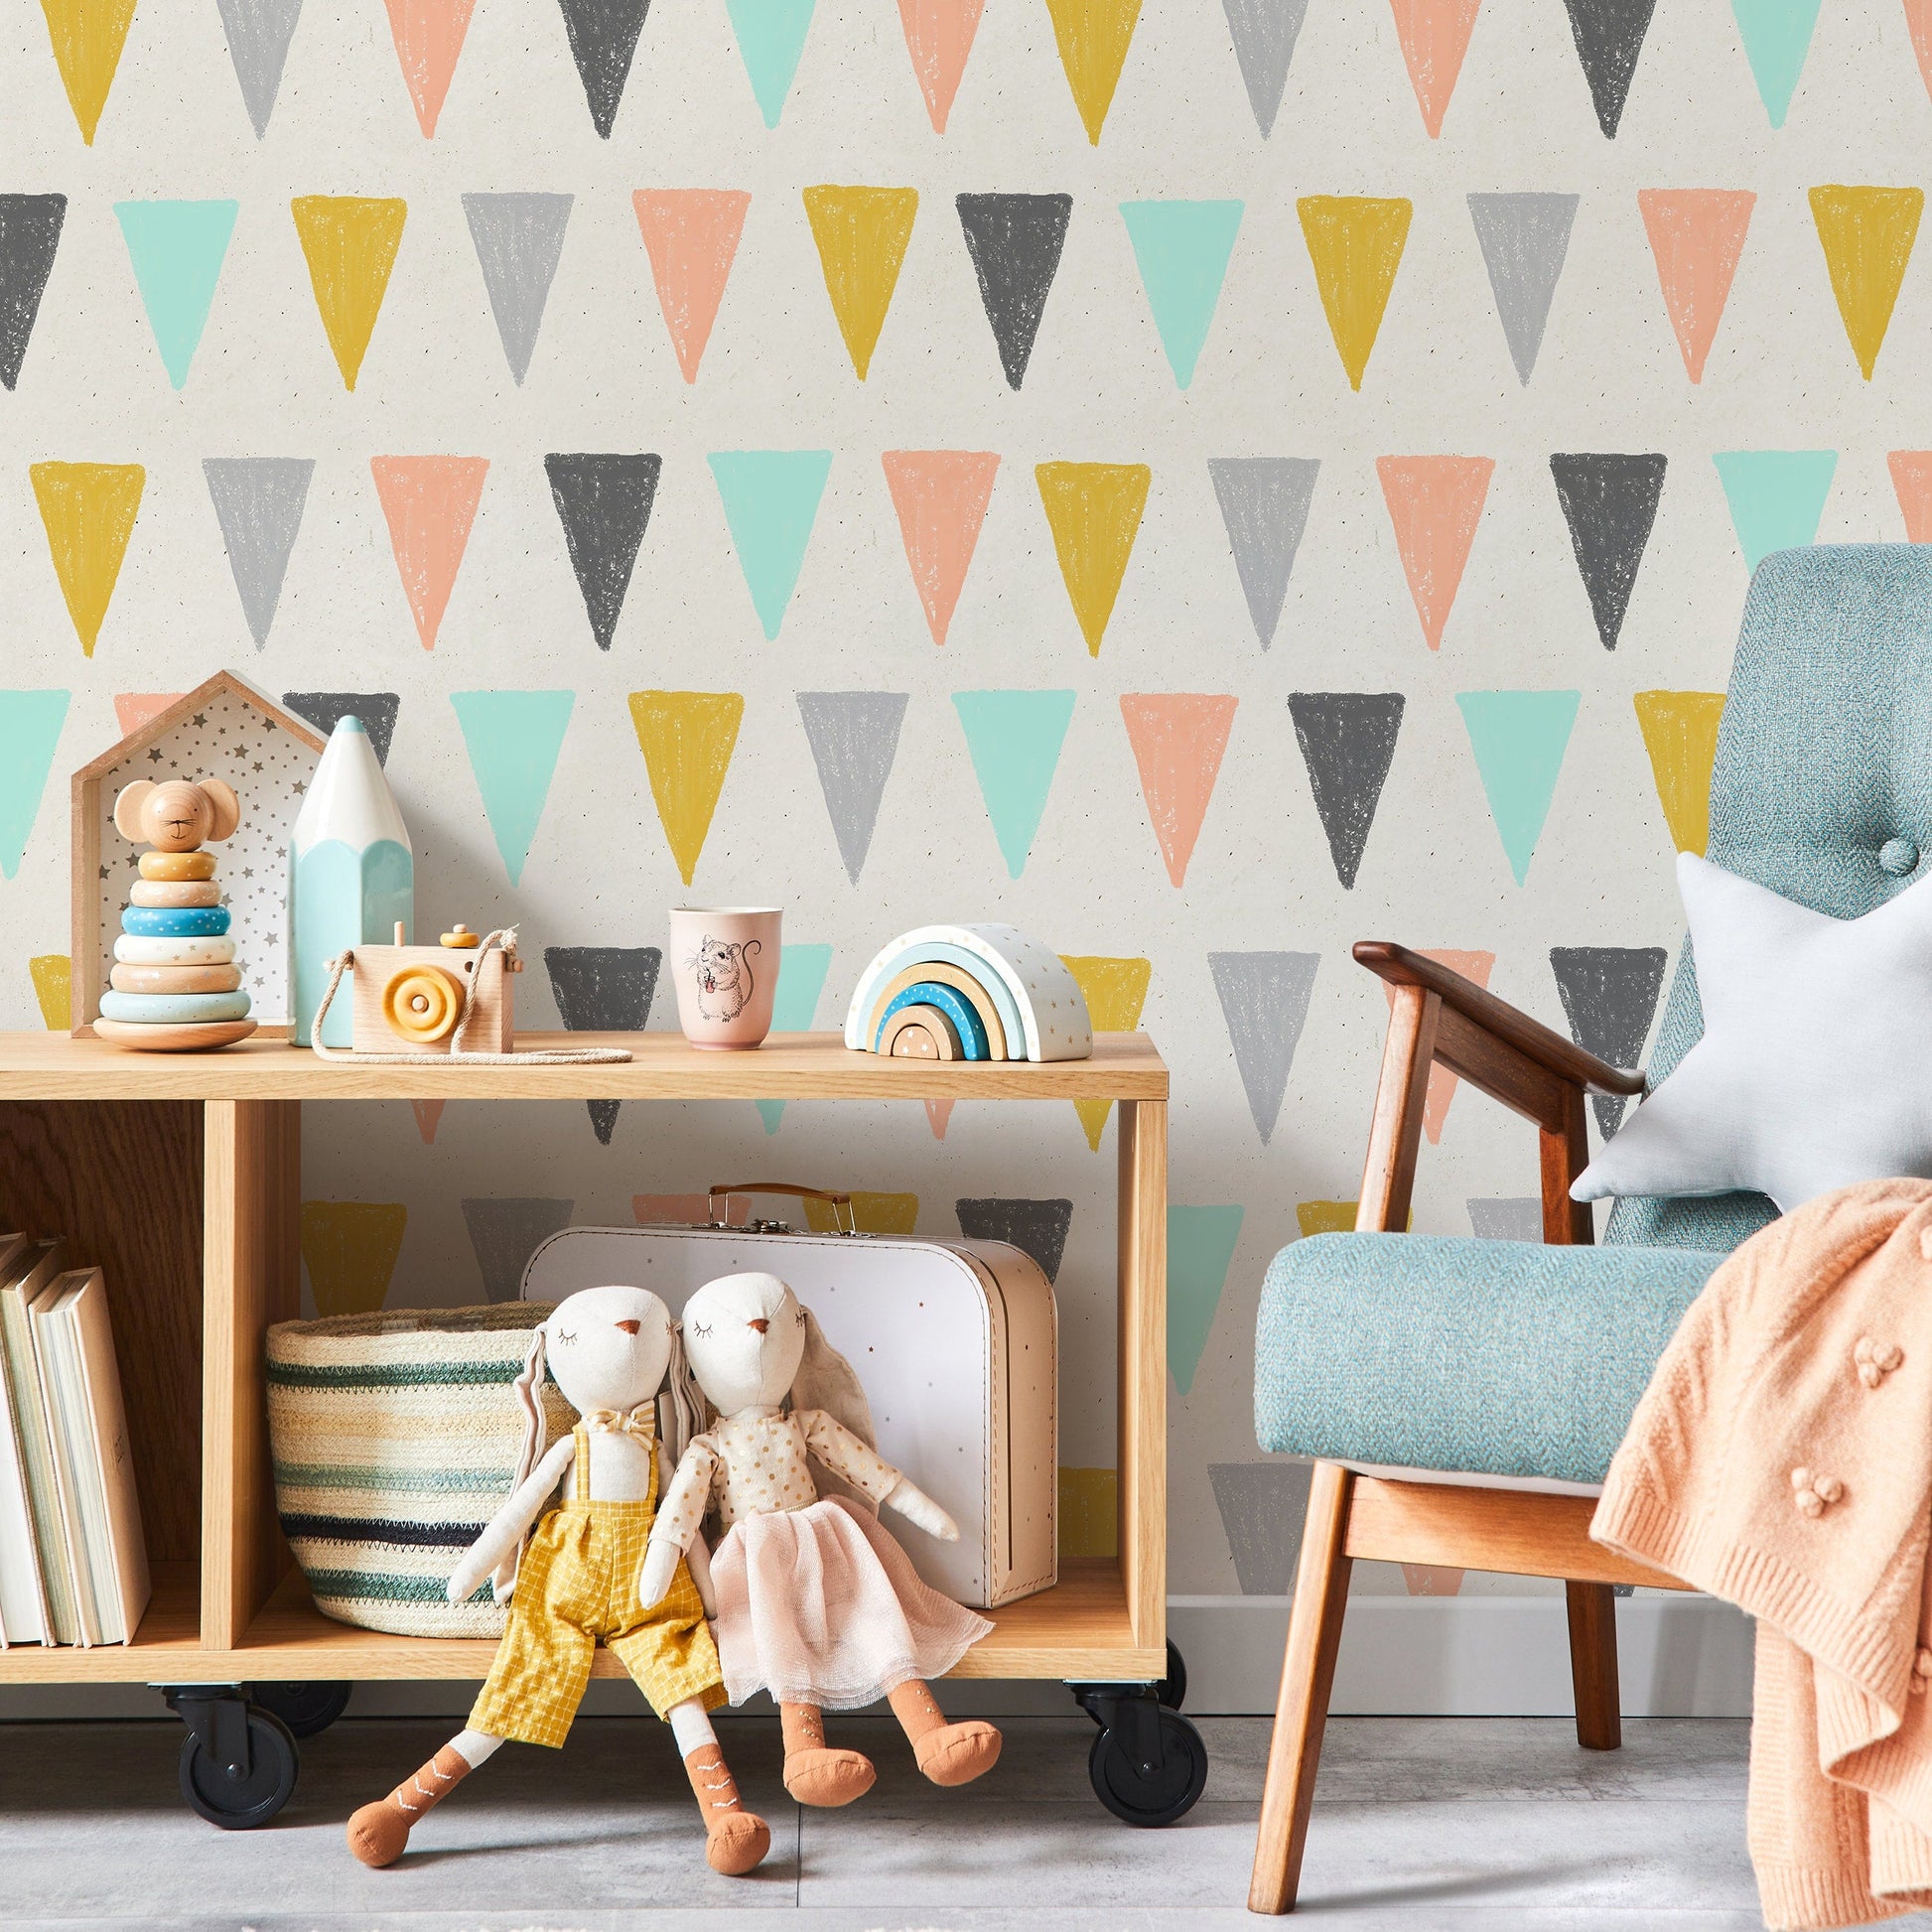 Colorful Triangles Geometric Wallpaper Removable Wallpaper Scandinavian Wallpaper Peel and Stick and Traditional Wallpaper Wall Paper - B075